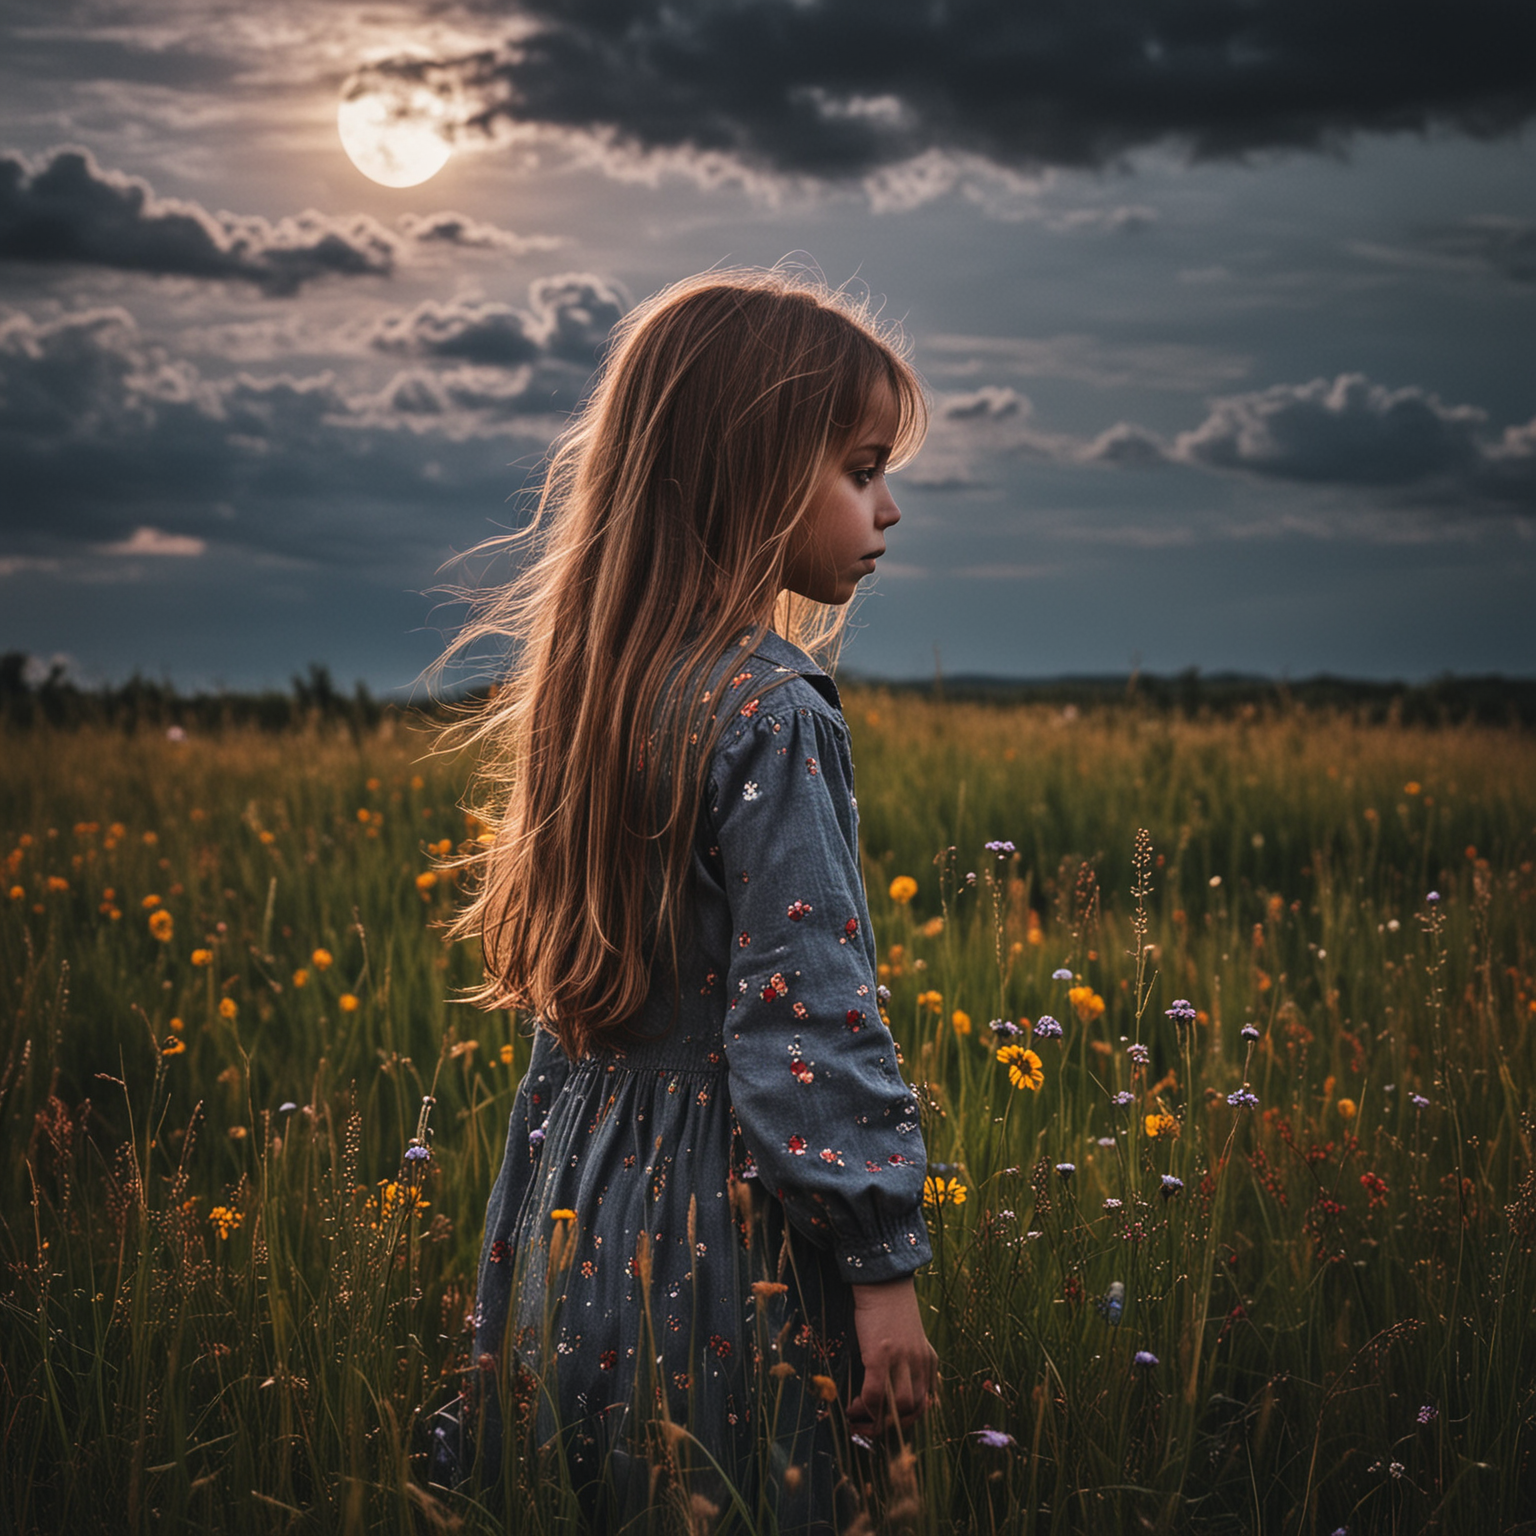 child alone sad backlight long hair back high grass colors flowers stormy clouds moon